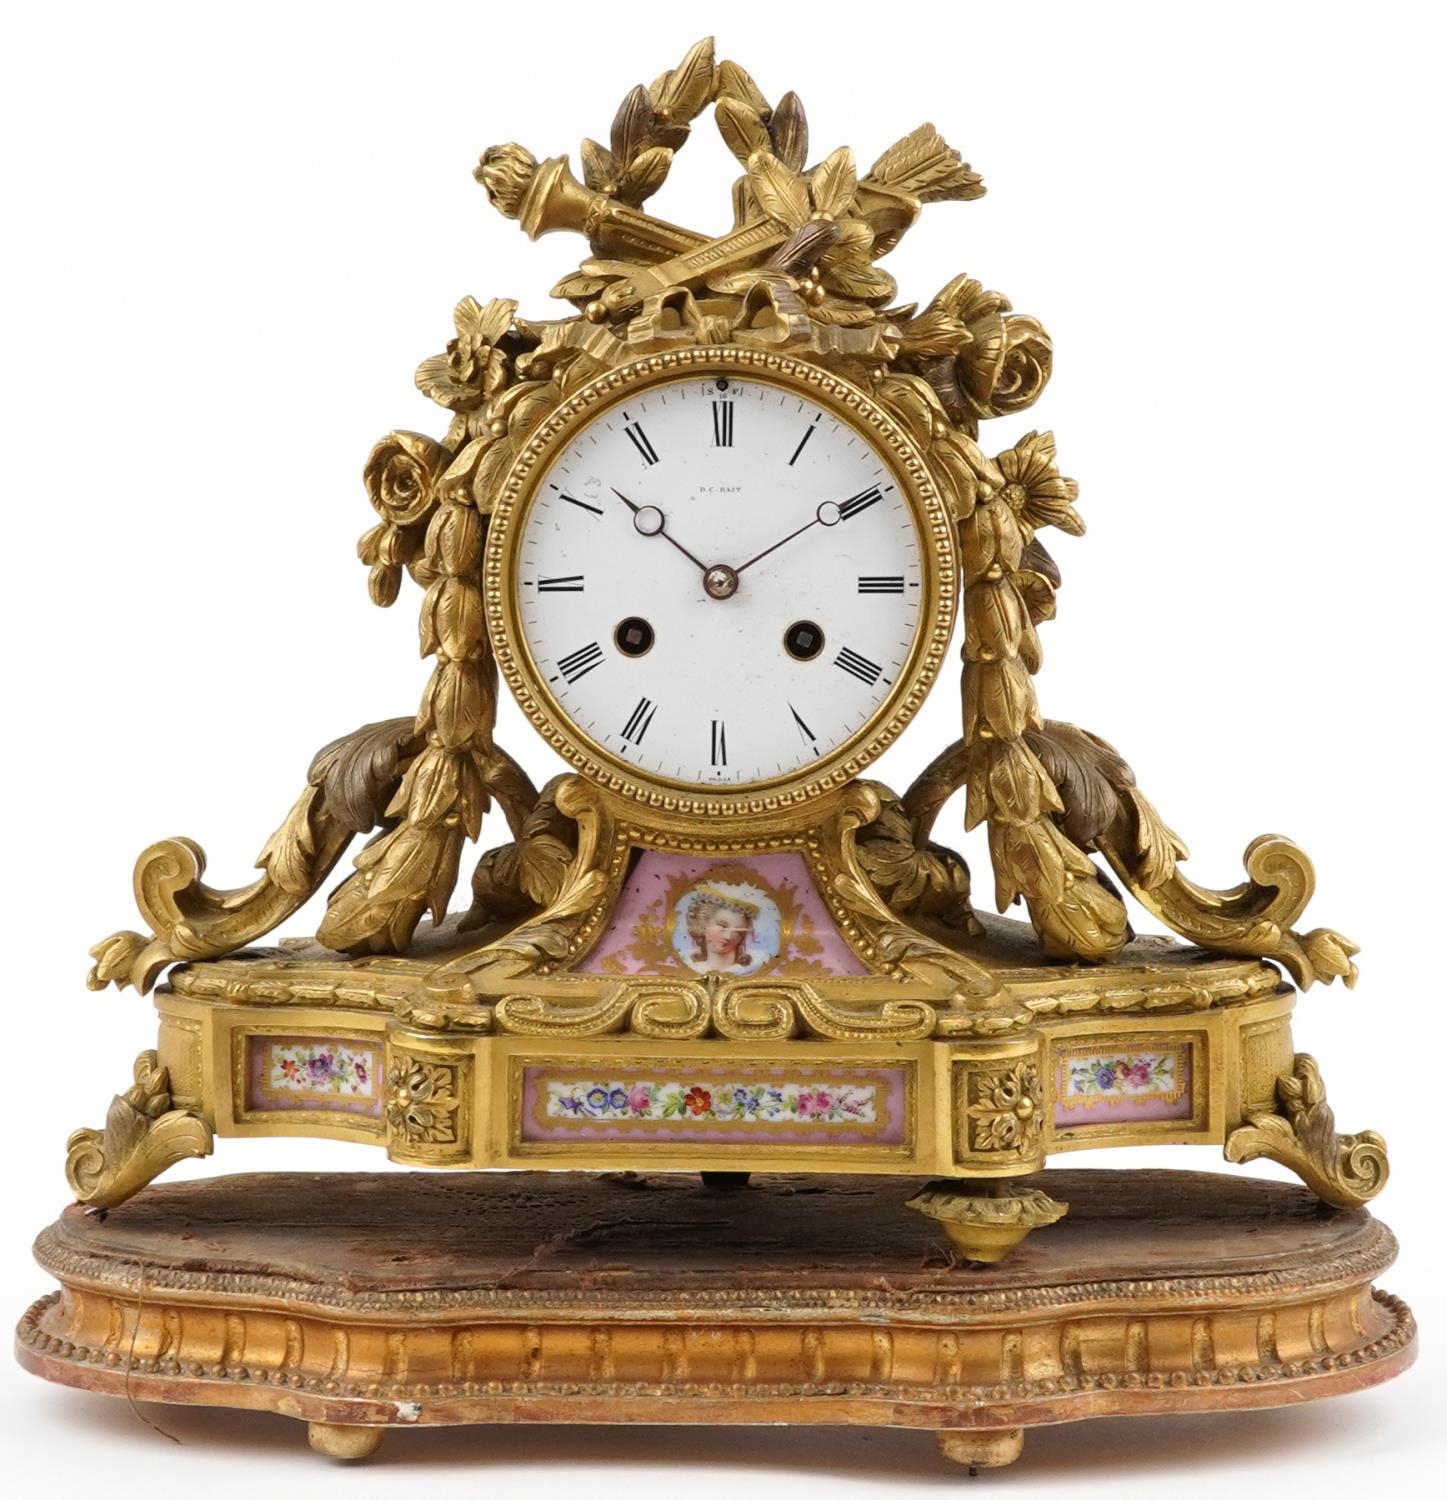 Drocourt of Paris, 19th century French ormolu mantle clock striking on a bell,cast with torches